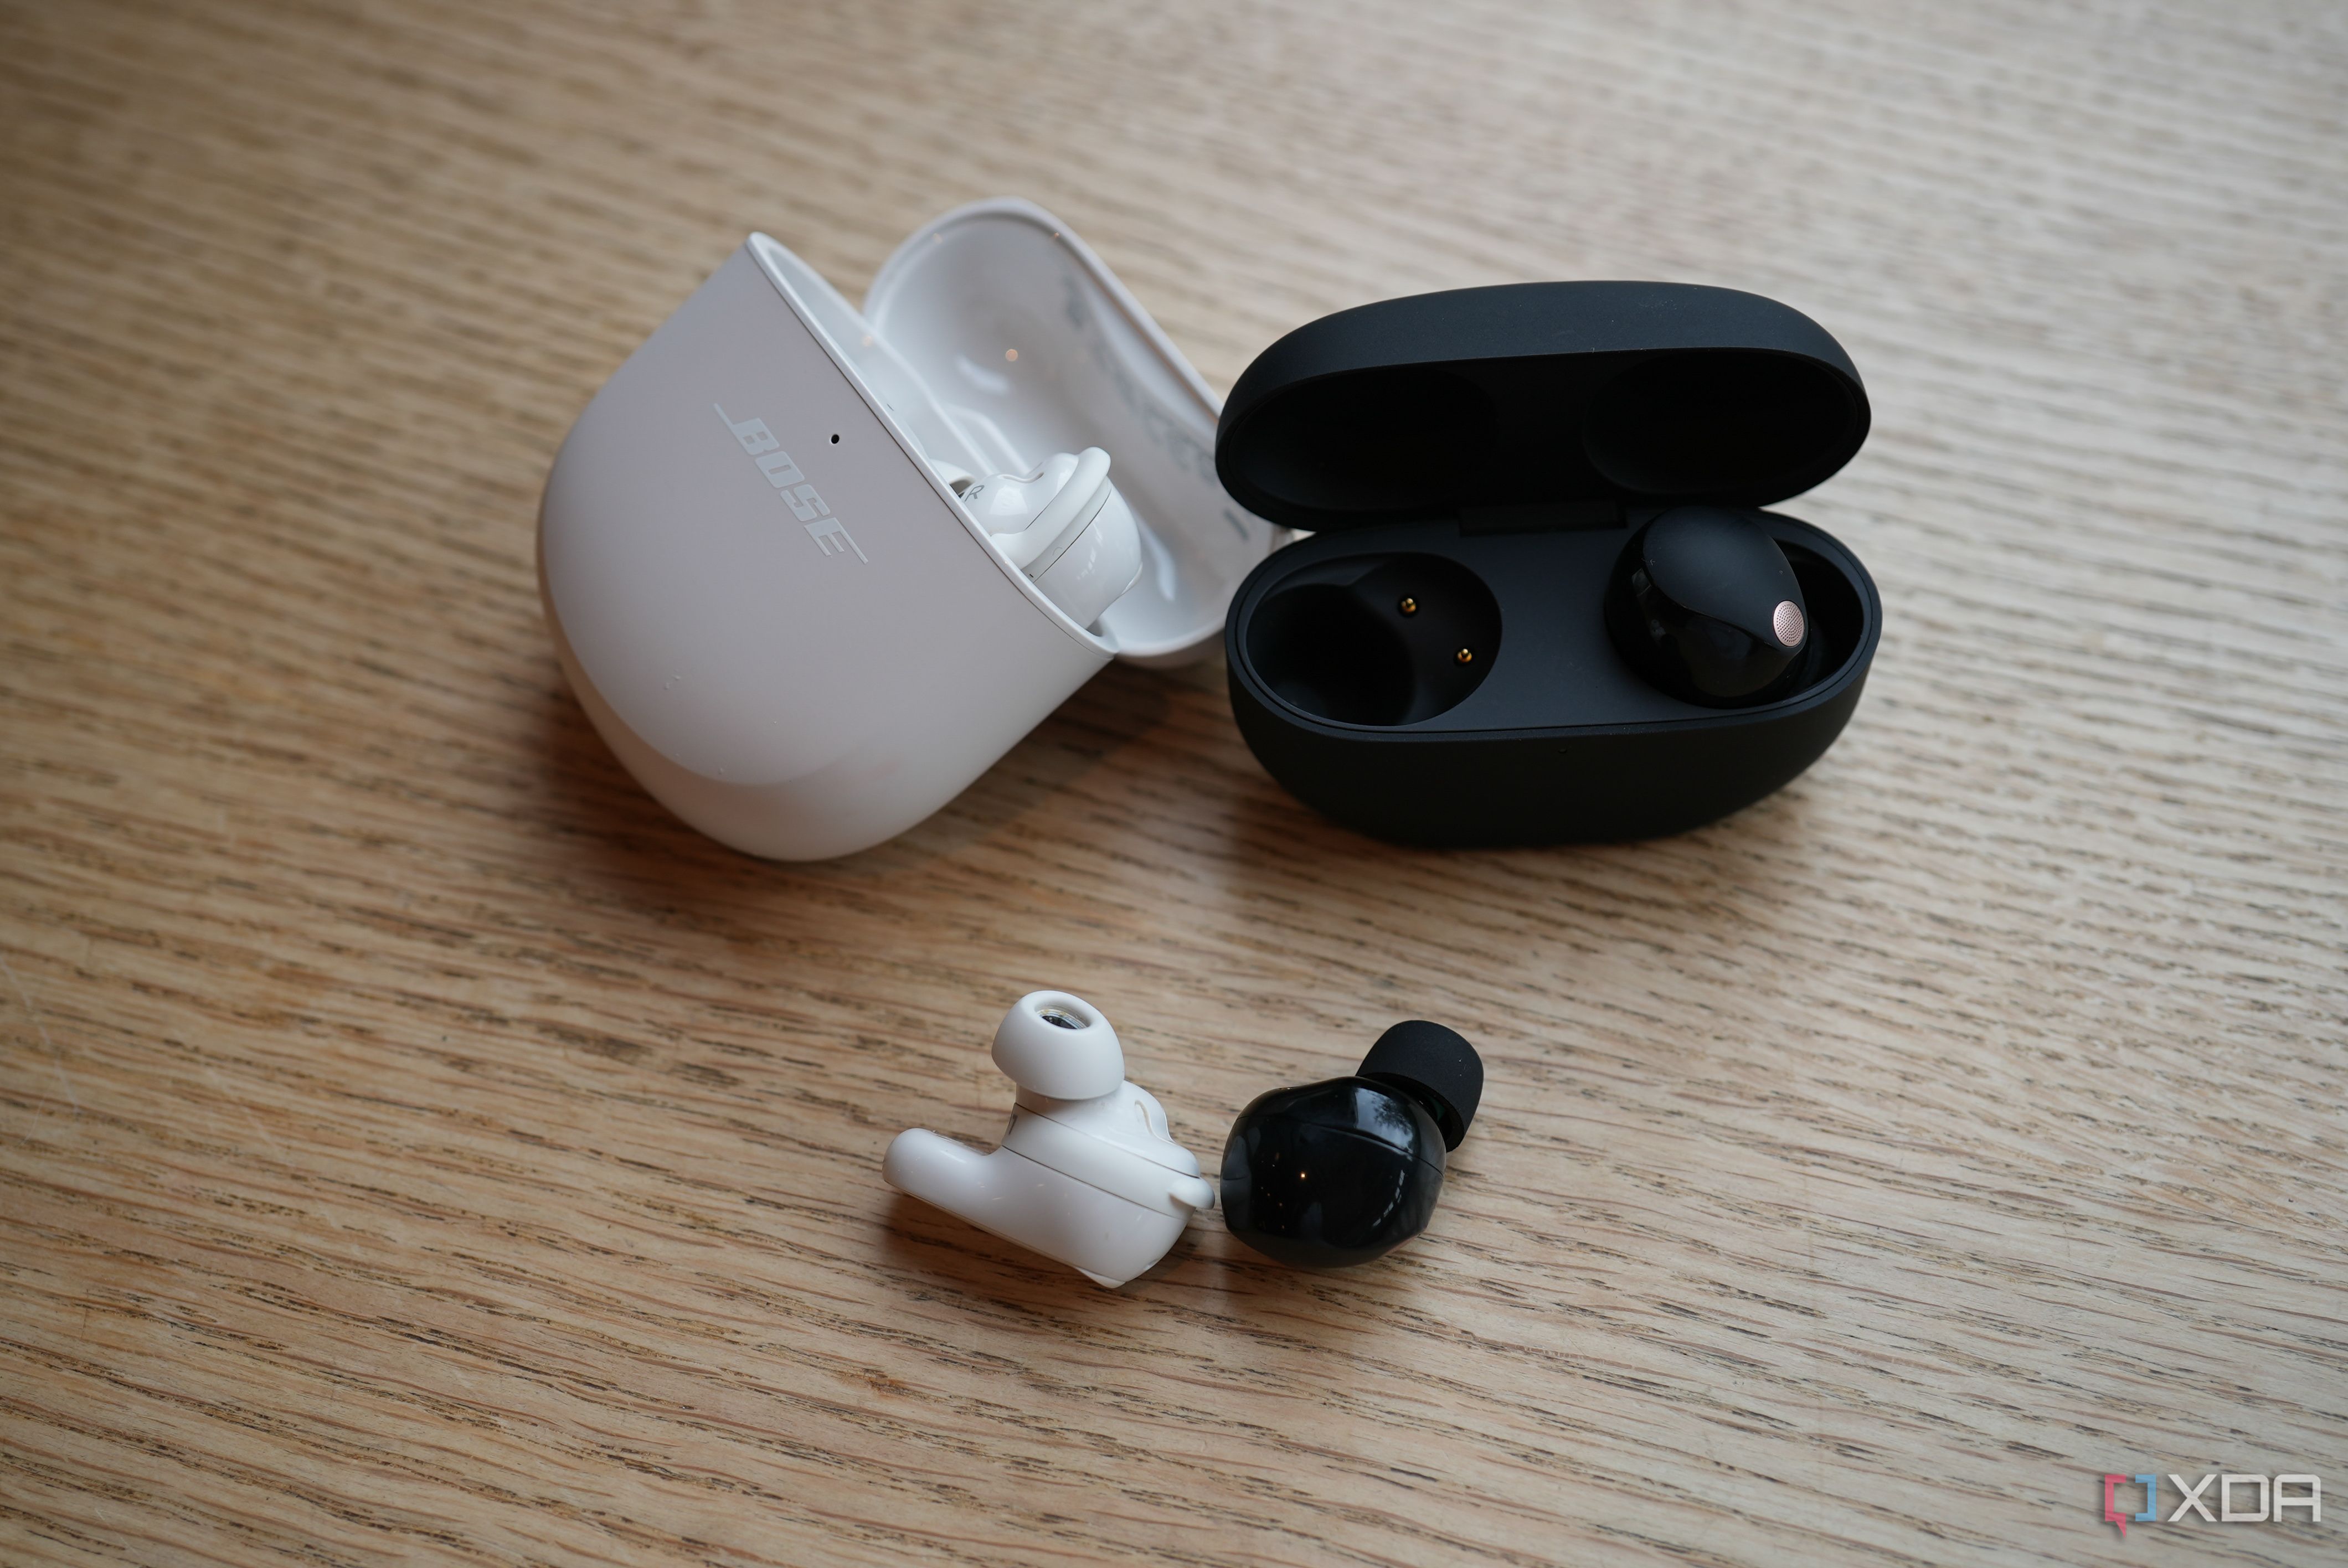 Best wireless headphones for iPhone: AirPods vs earbuds for iPhone